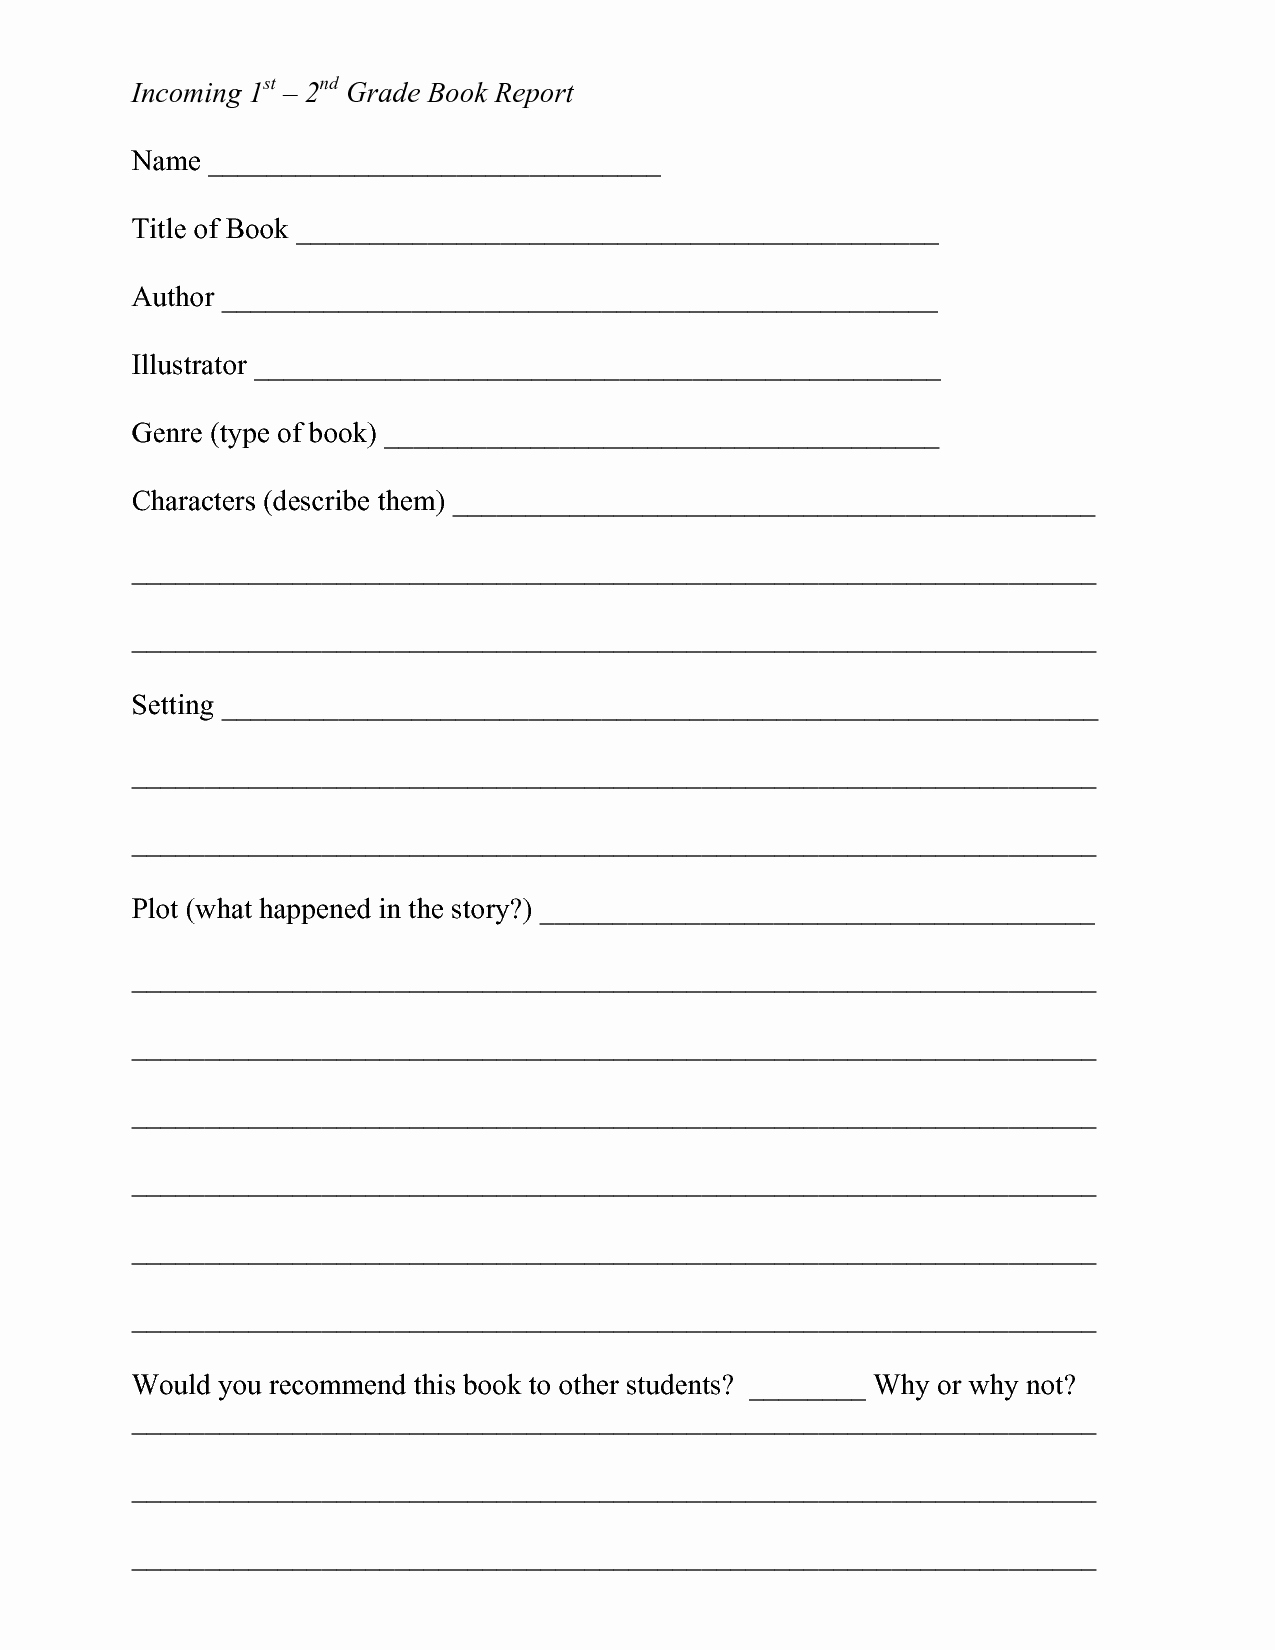 4th Grade Biography Book Report Outline 1000 Ideas About